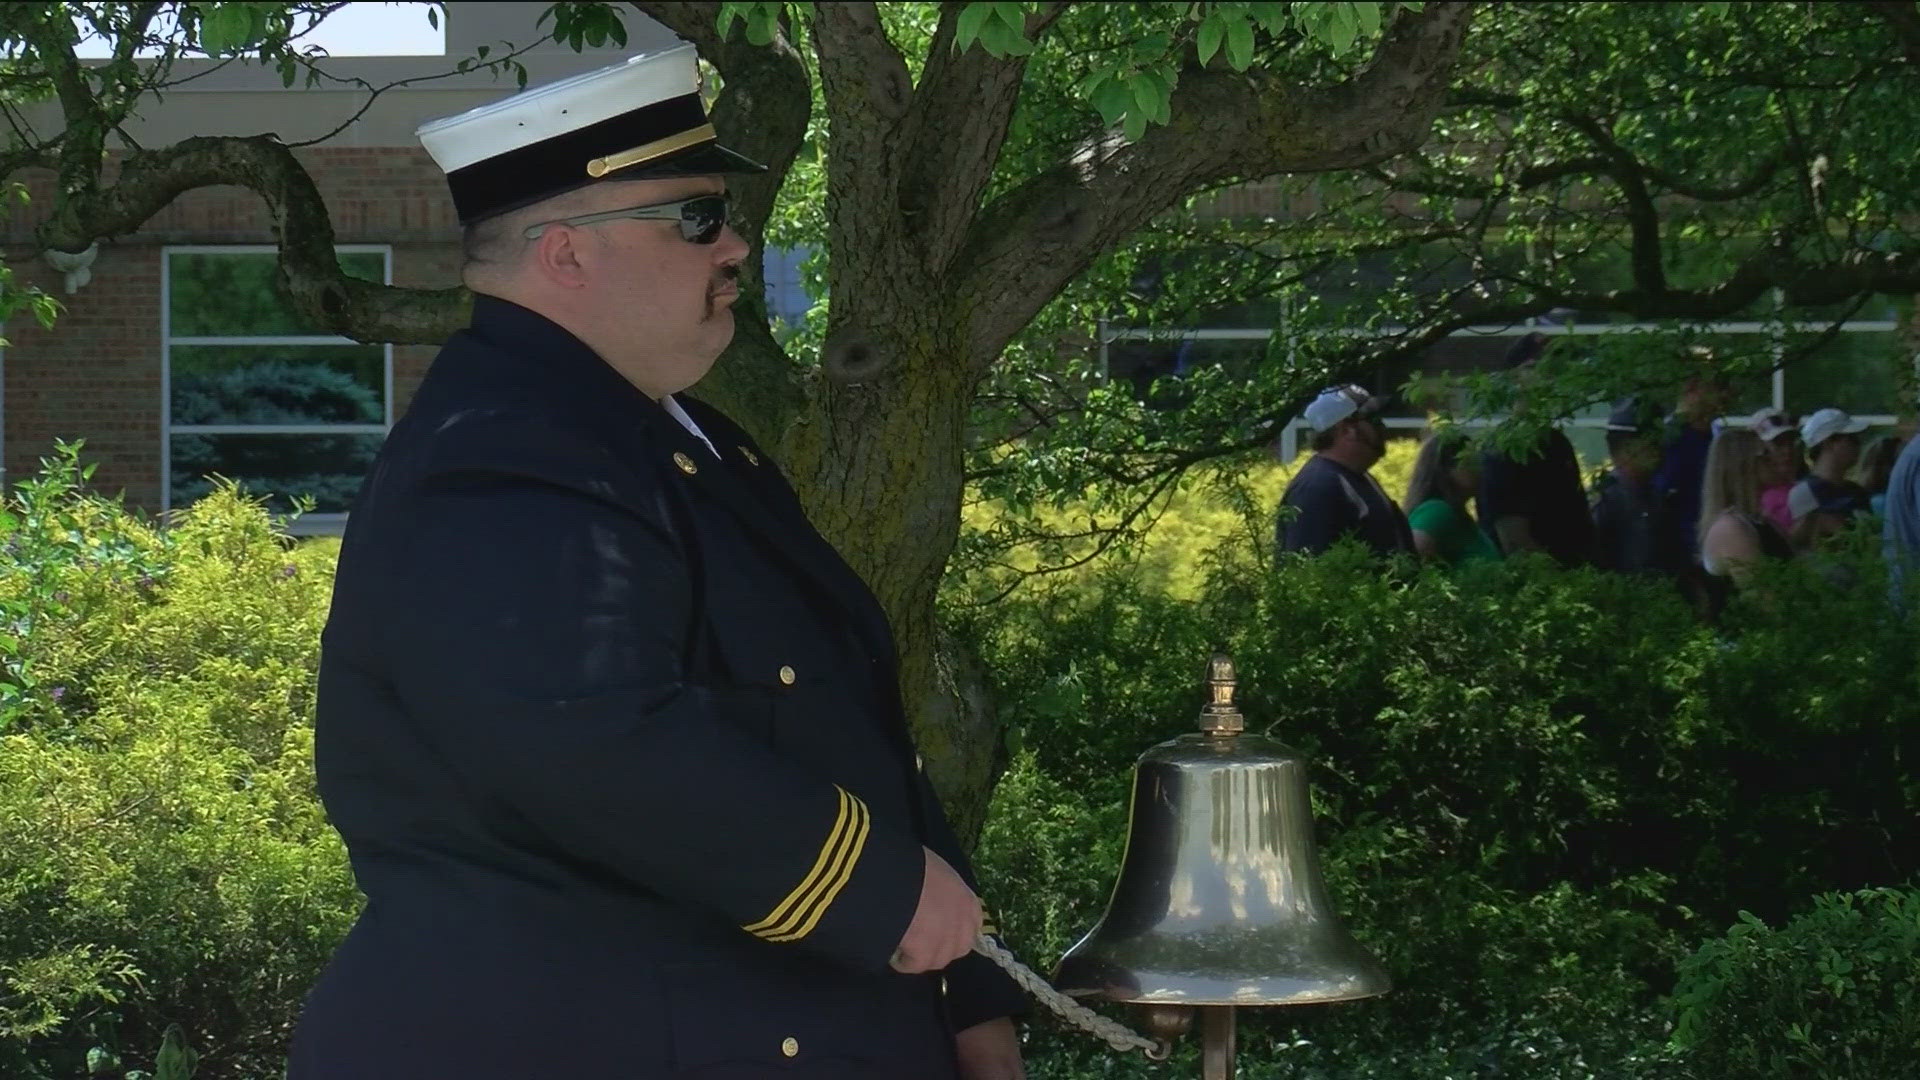 One by one, the names of the deceased were read as a bell tolled in their honor.